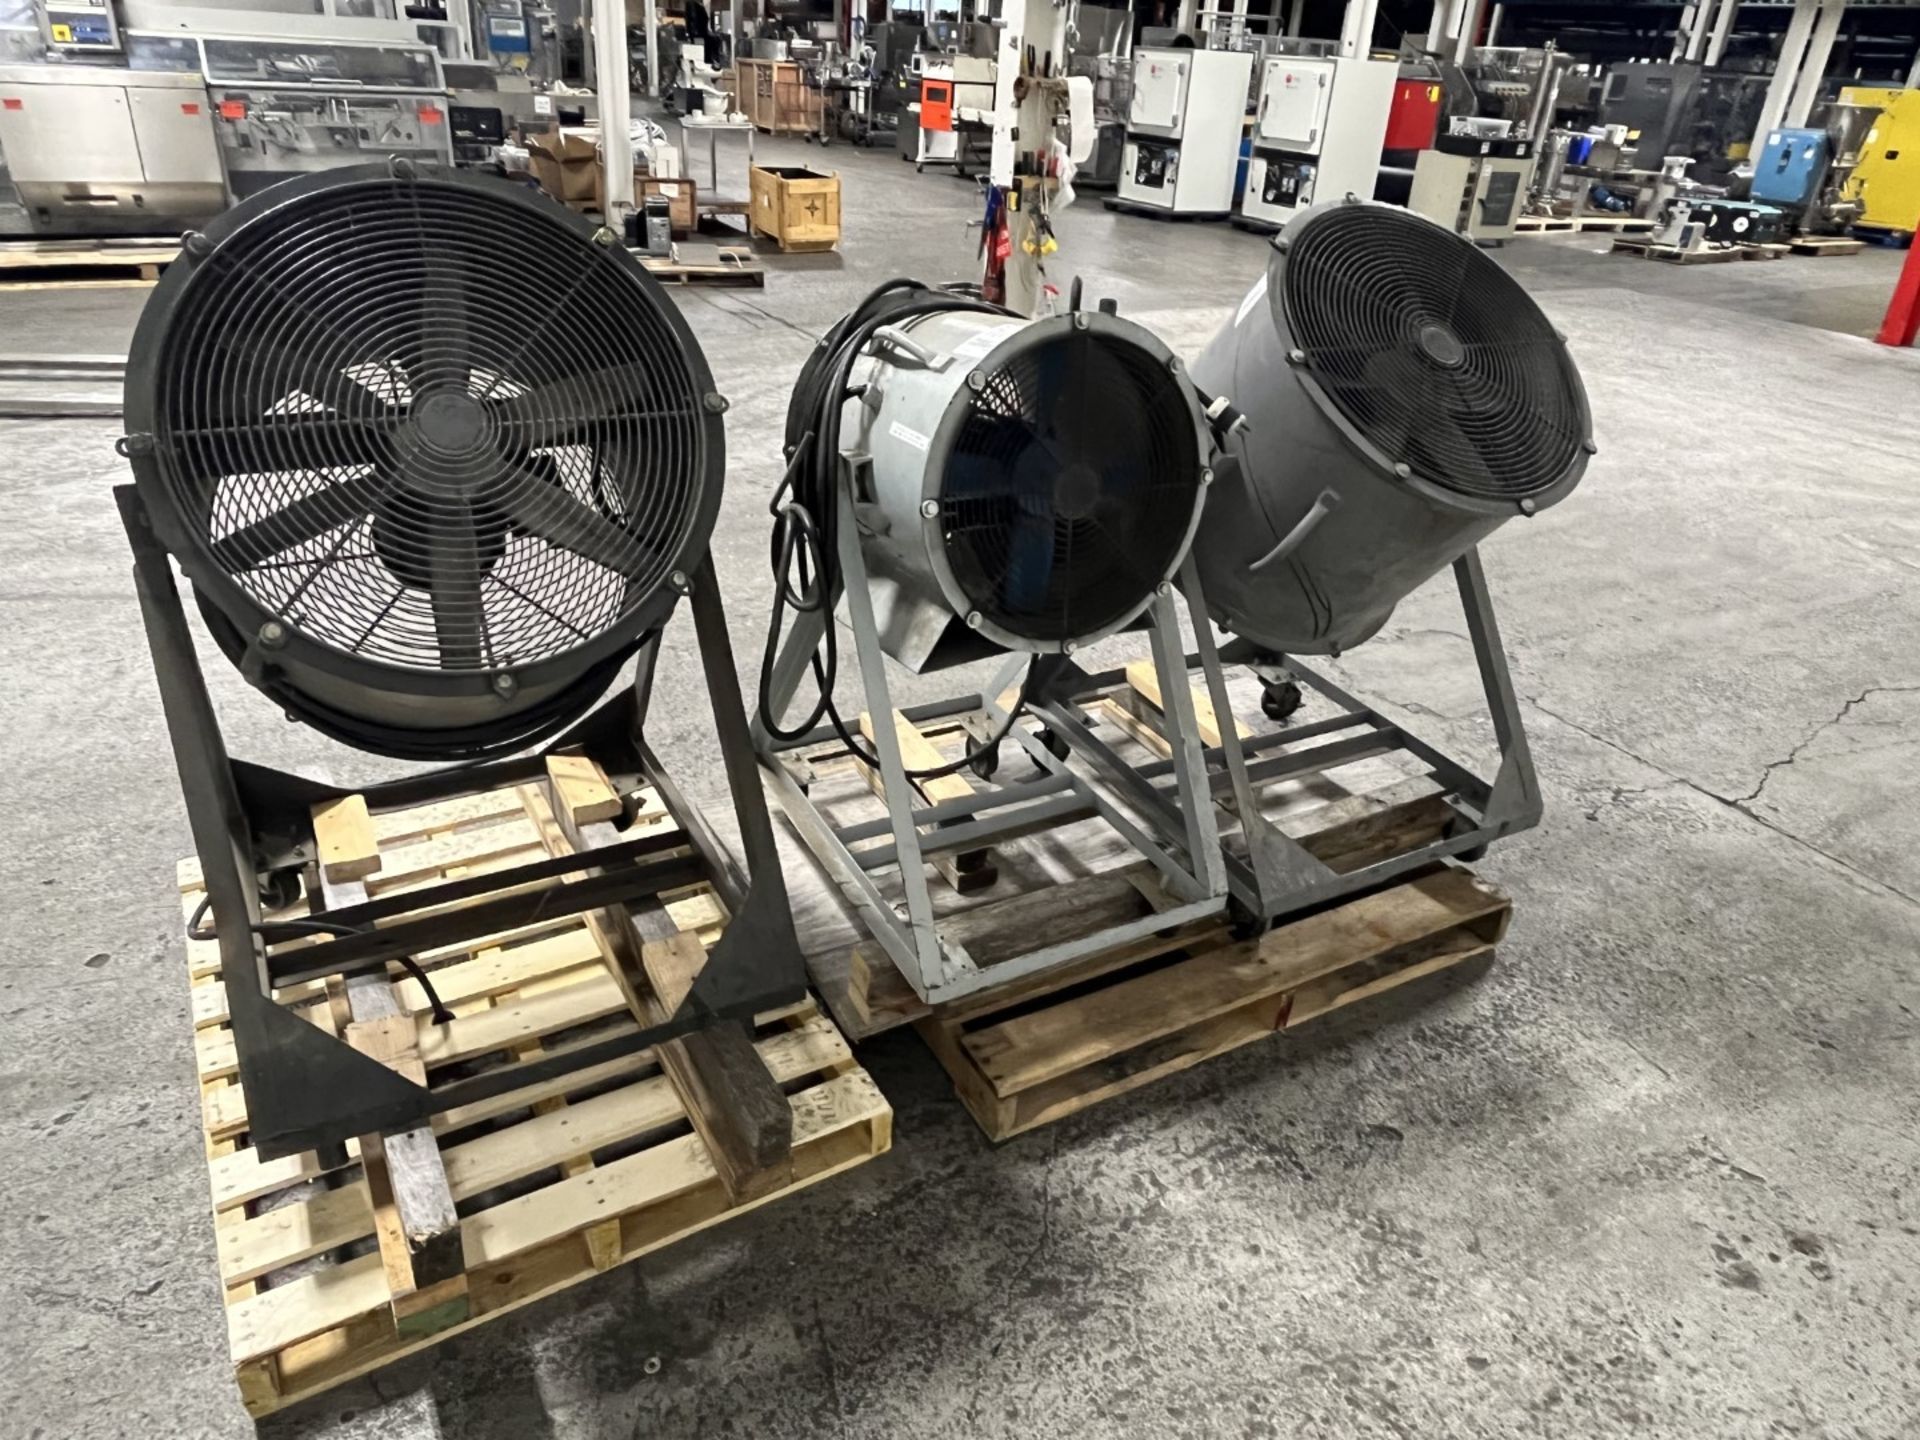 Lot of three industrial fans